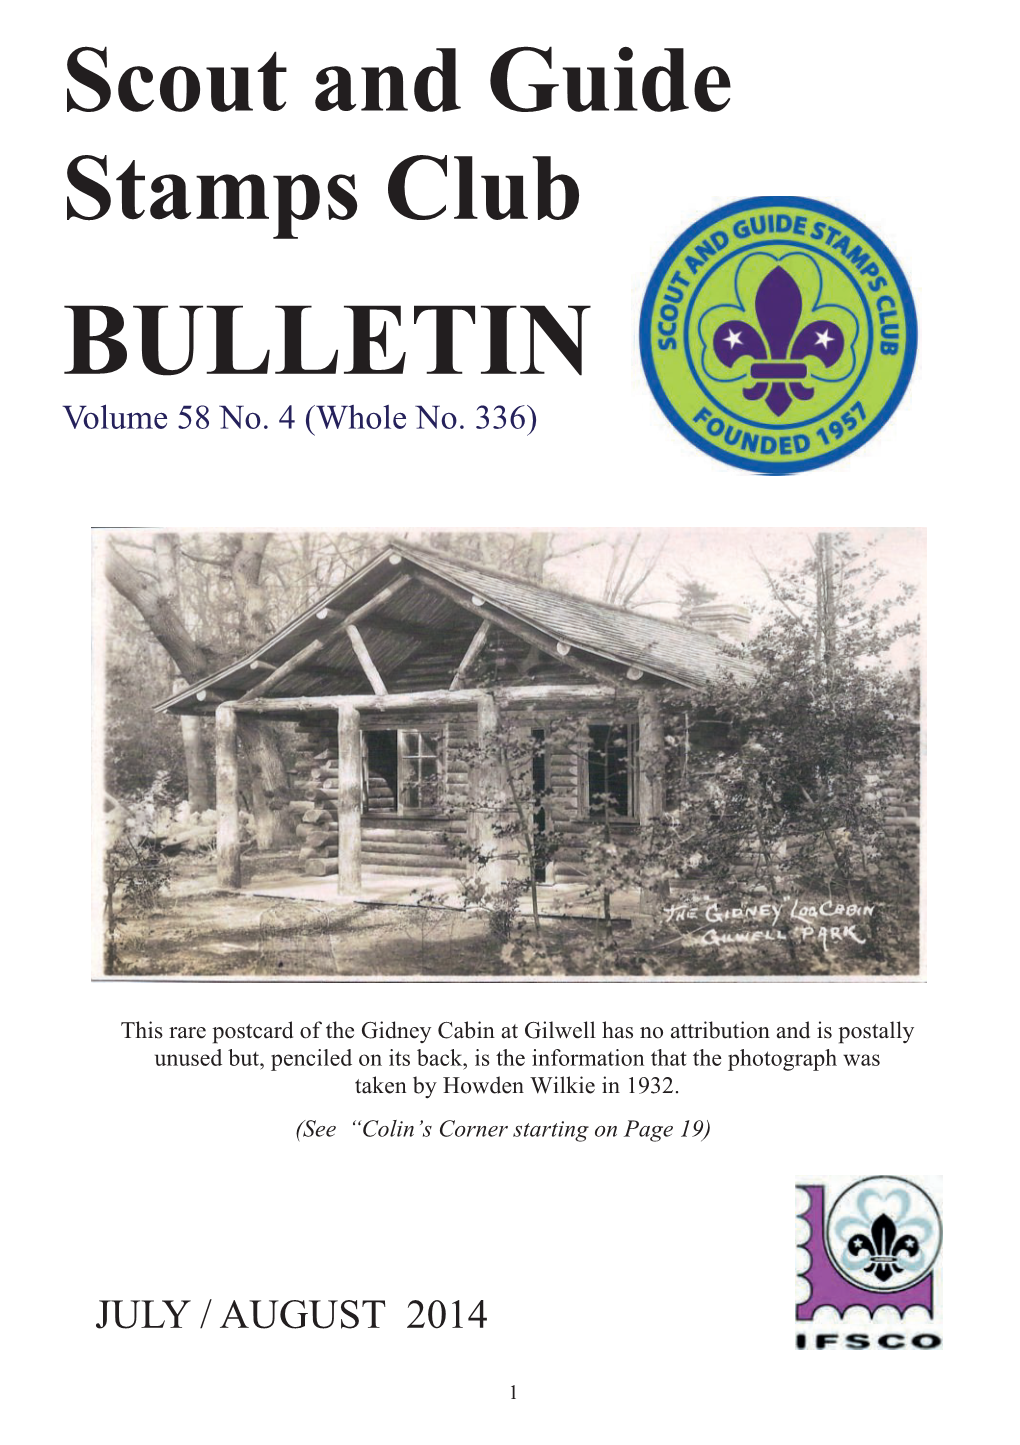 Scout and Guide Stamps Club BULLETIN #336